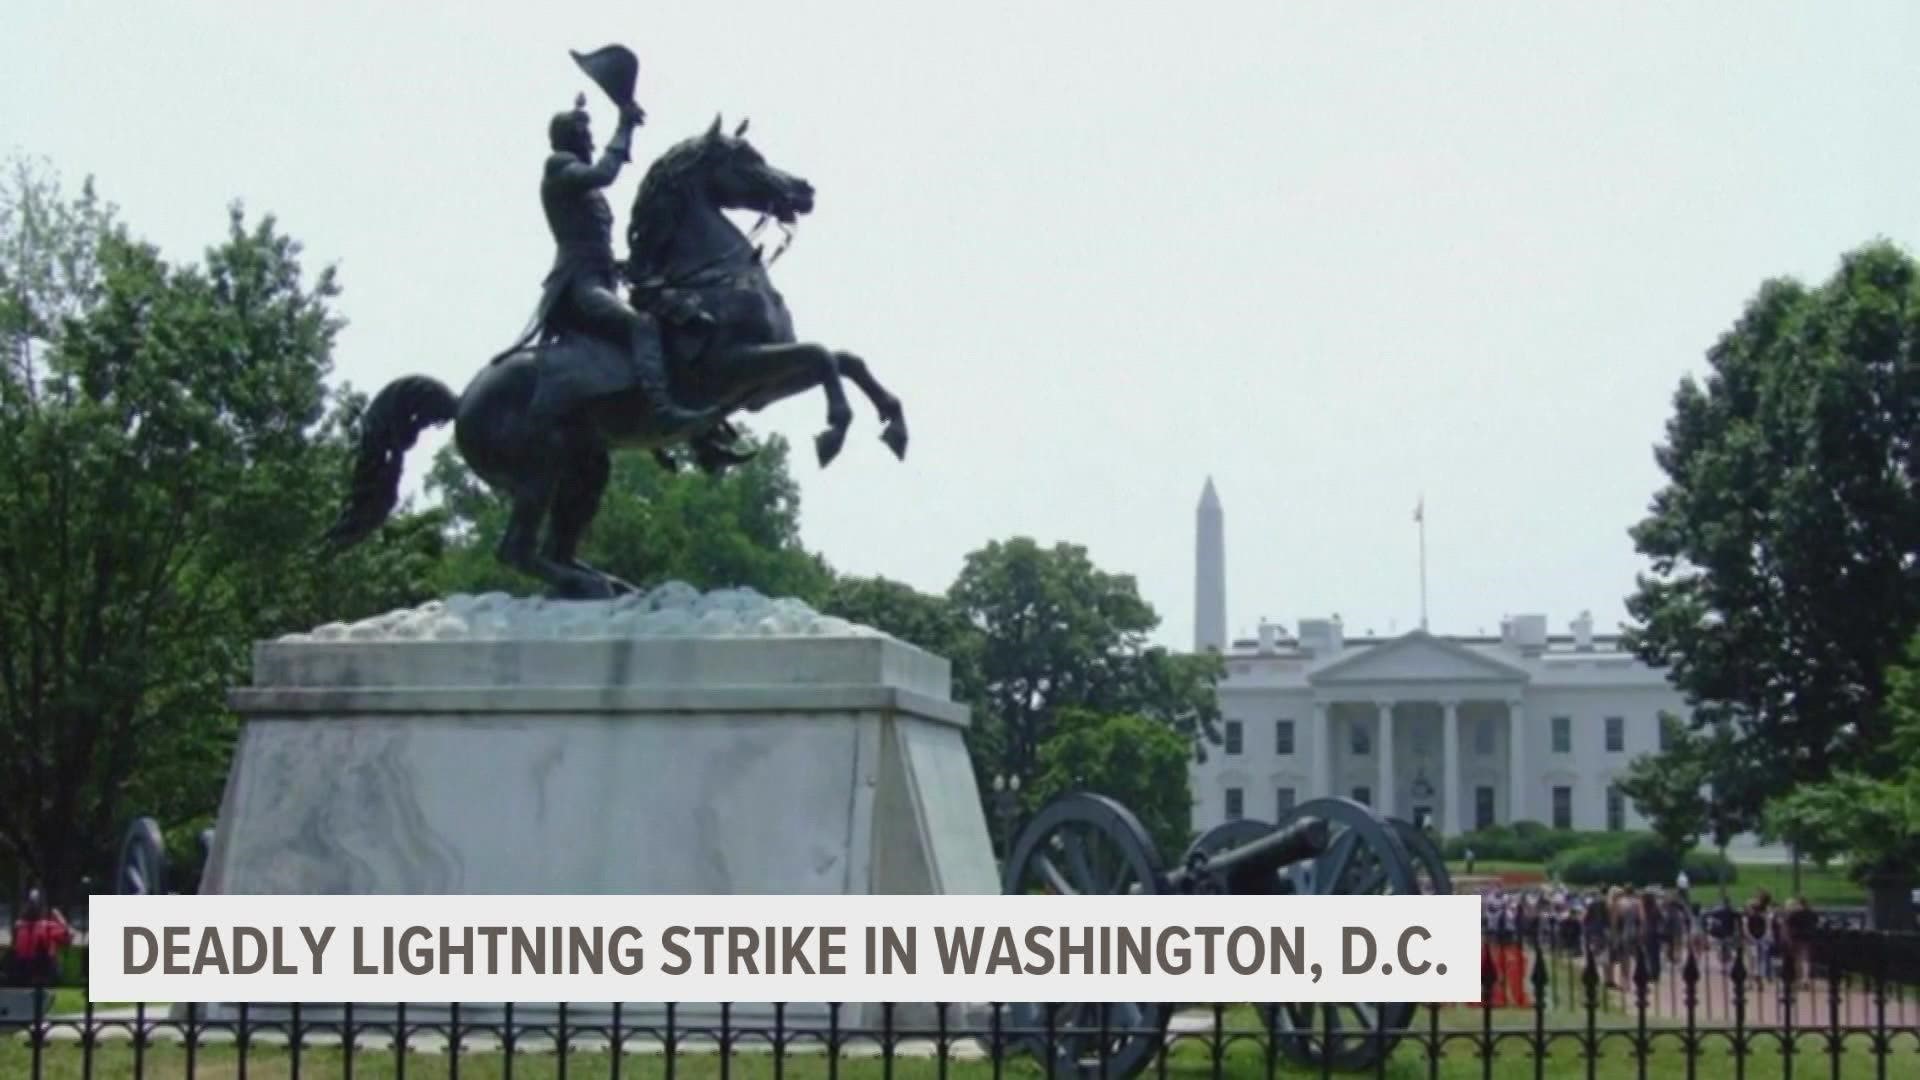 The four people were at a park outside the White House when the lightning strike hit.